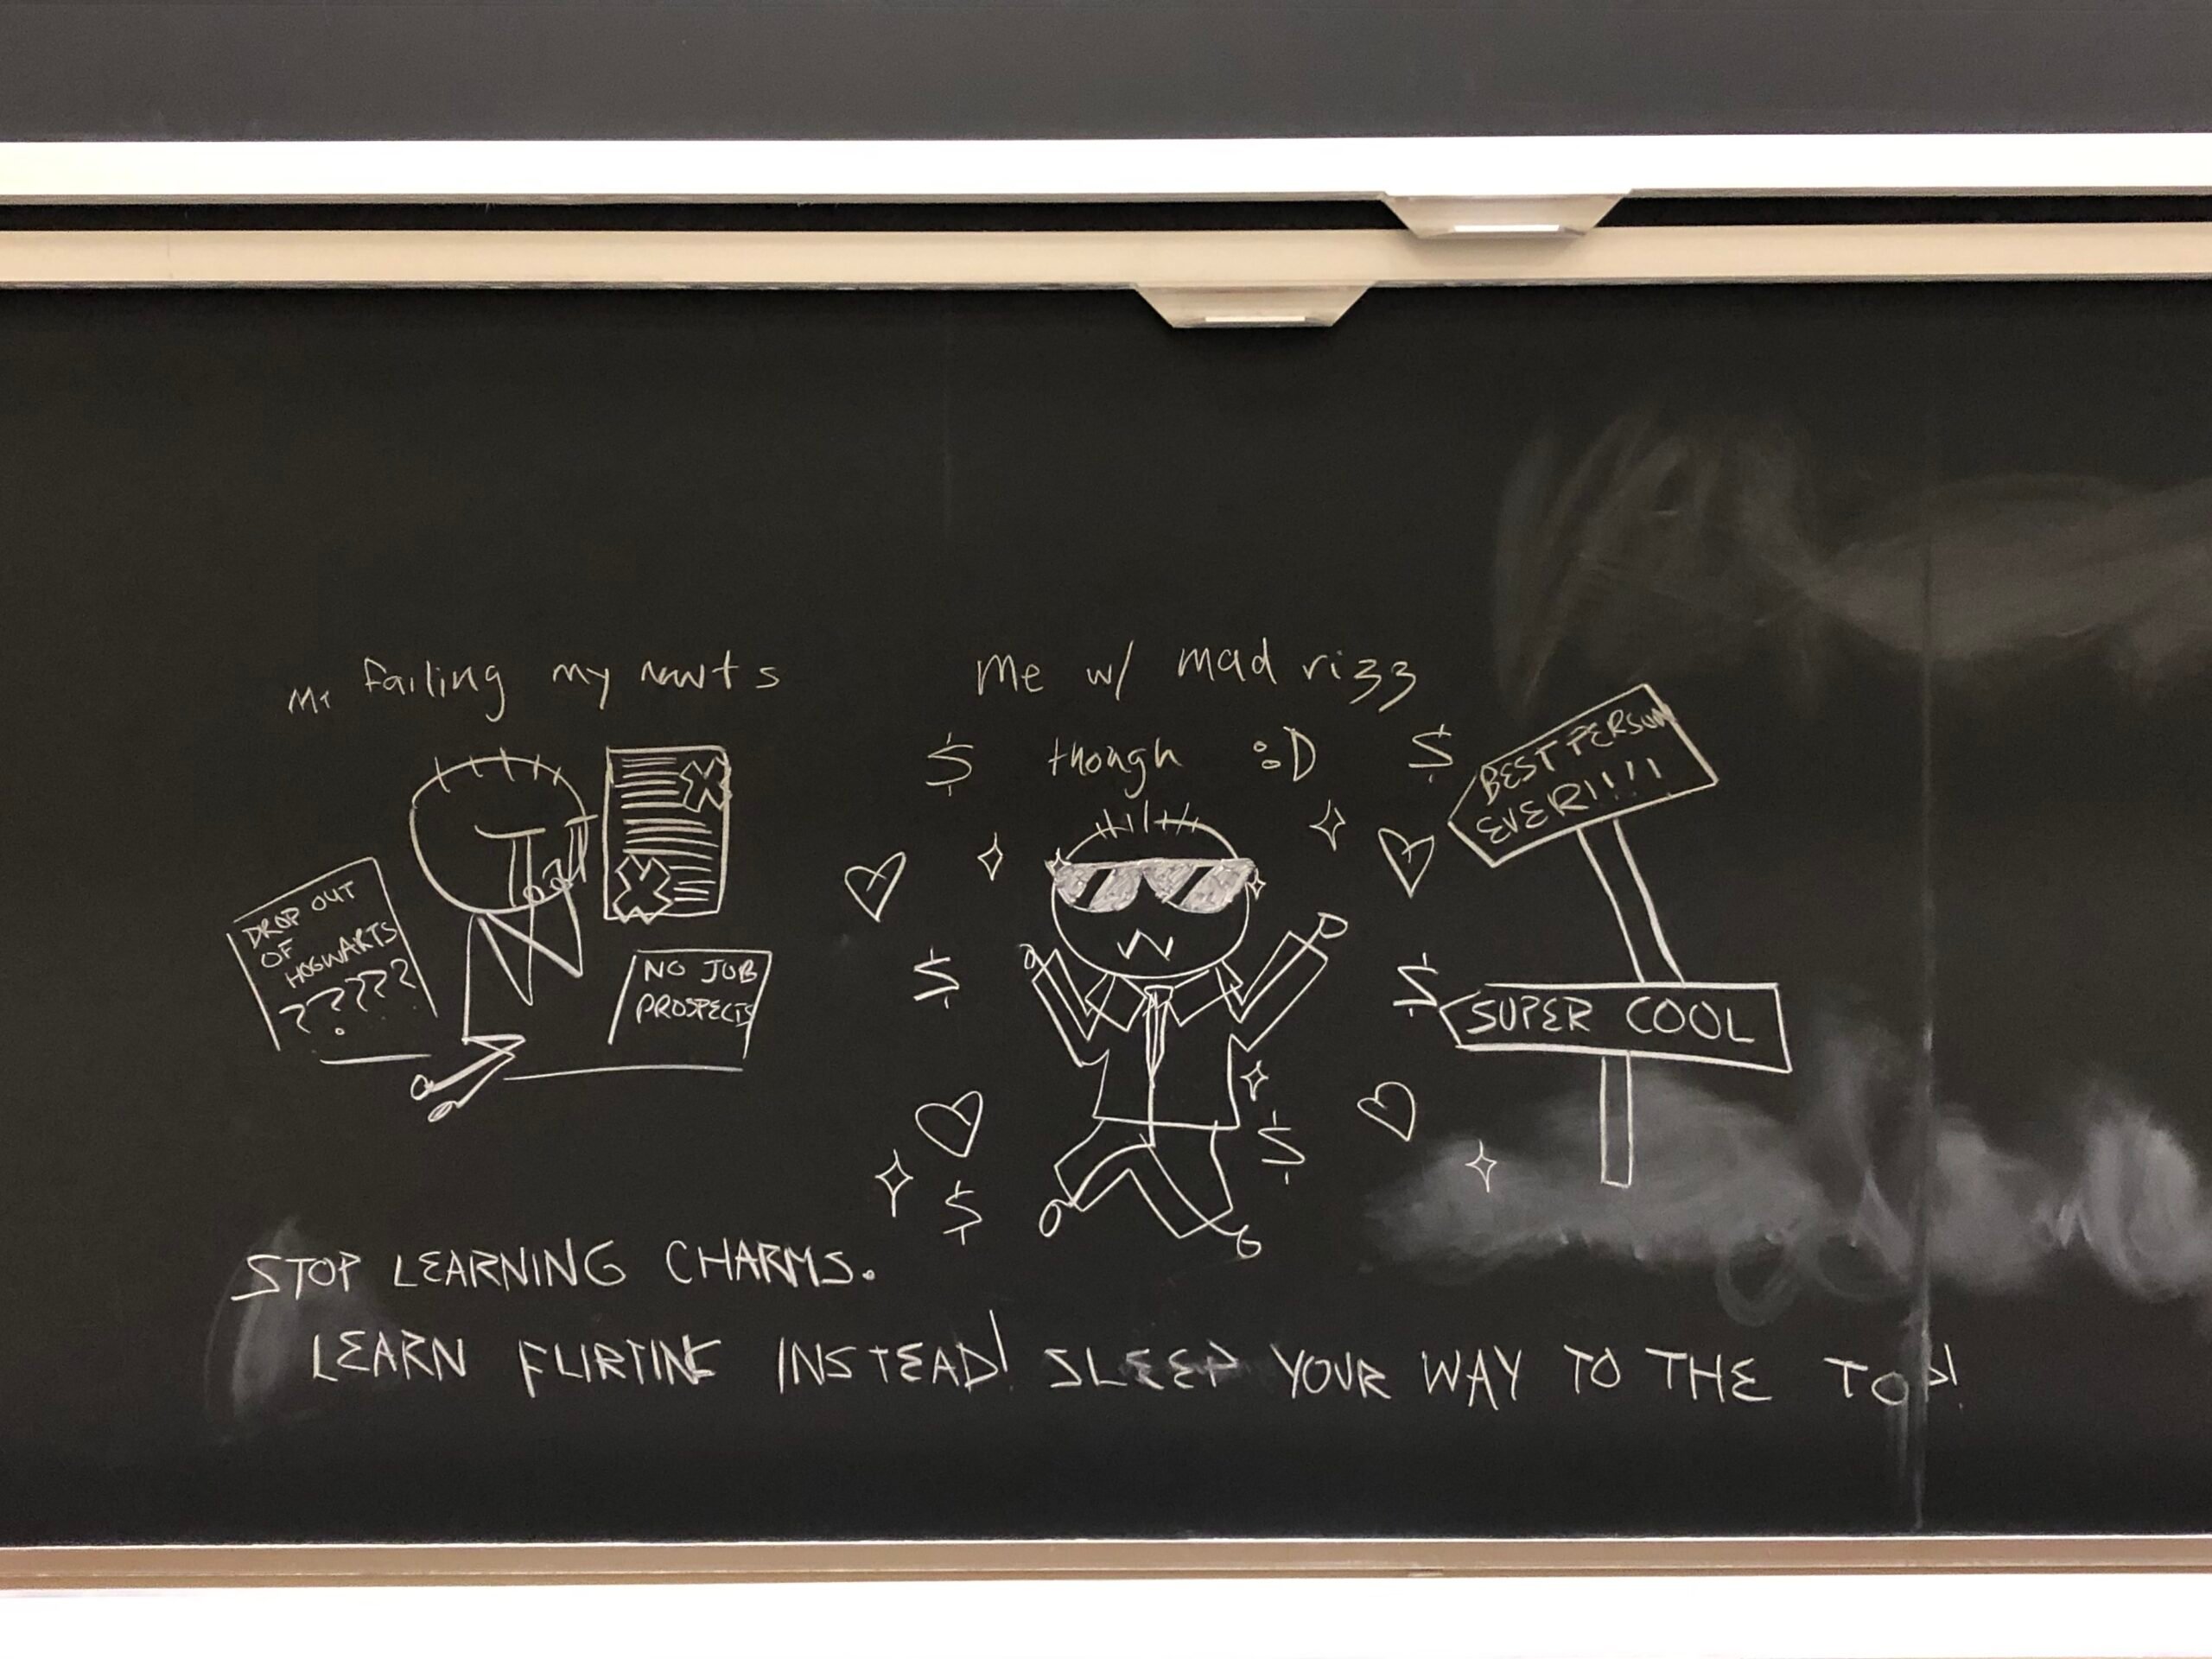 a chalk drawing of a person crying next to failed exams, and a happy person with hearts and dollar signs. underneath, "stop learning charms. learn flirting instead sleep your way to the top"